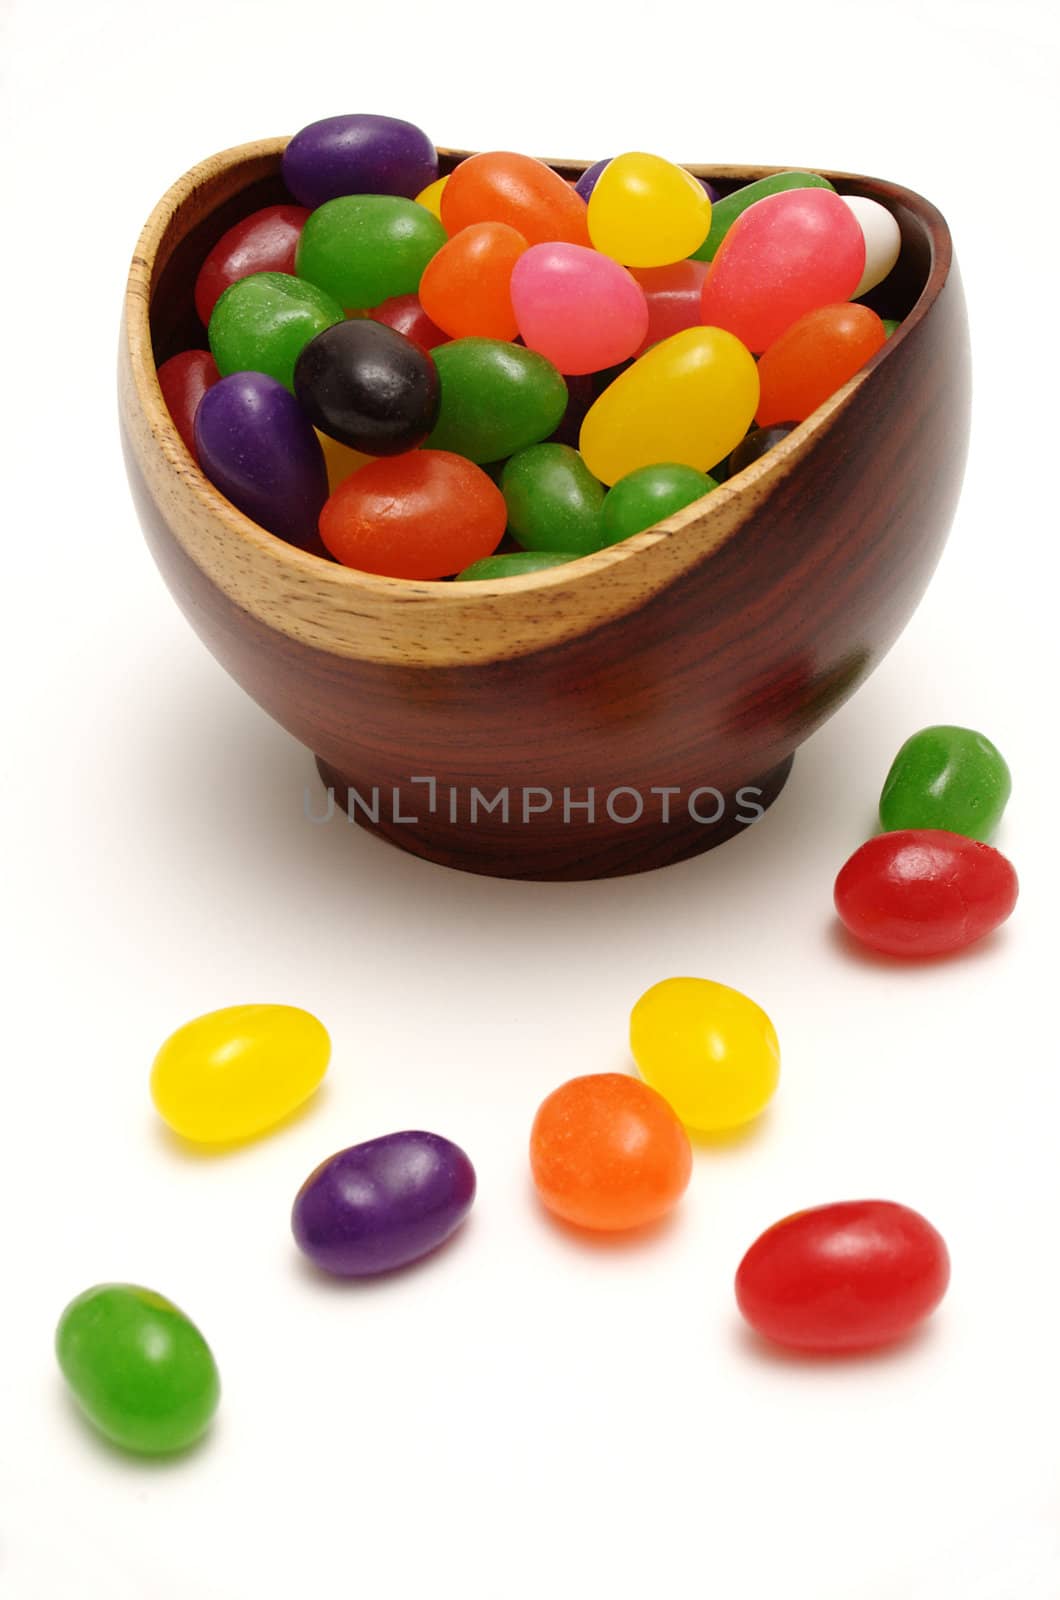 A rich dark reddish brown and light tan colored rosewood candy bowl filled with colorful jelly beans. A handful of candy is scattered in front of the bowl. Angle is from slightly above, image vertically oriented.